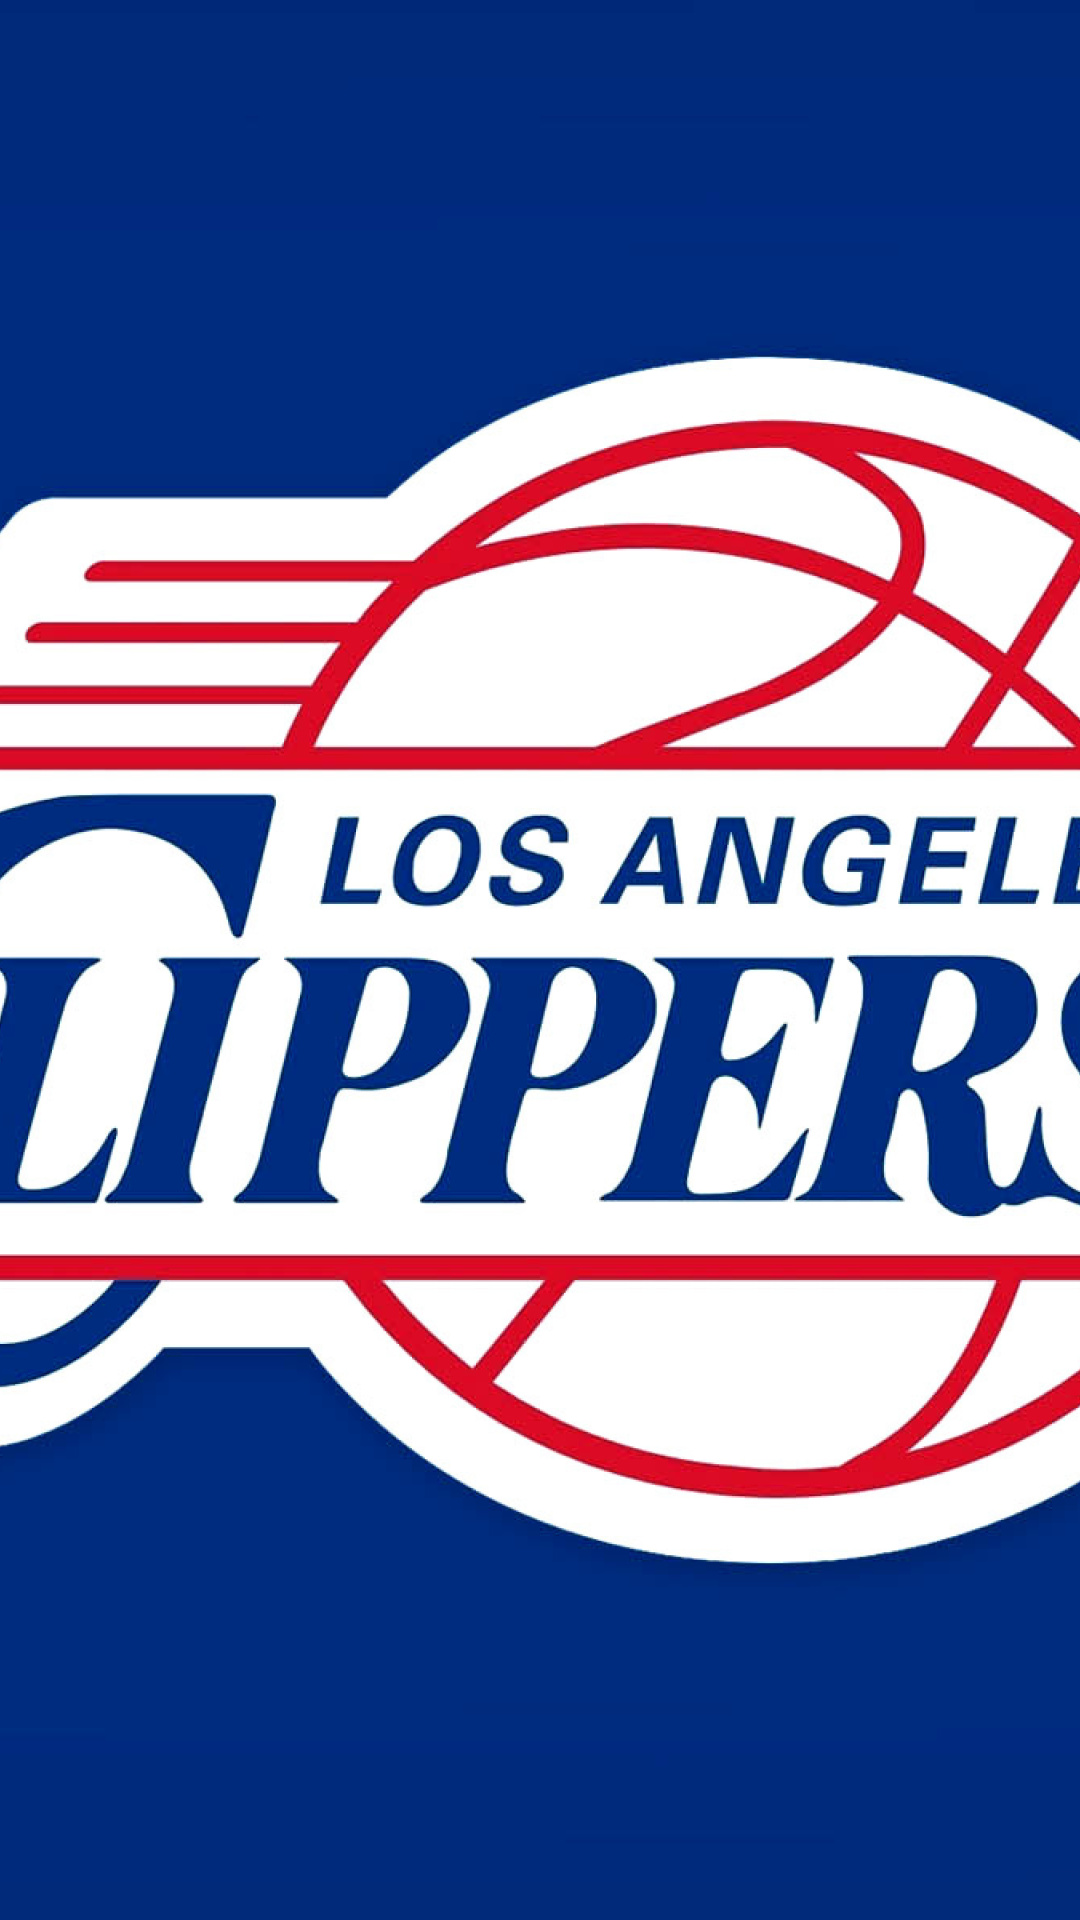 Los Angeles Clippers wallpaper 1080x1920